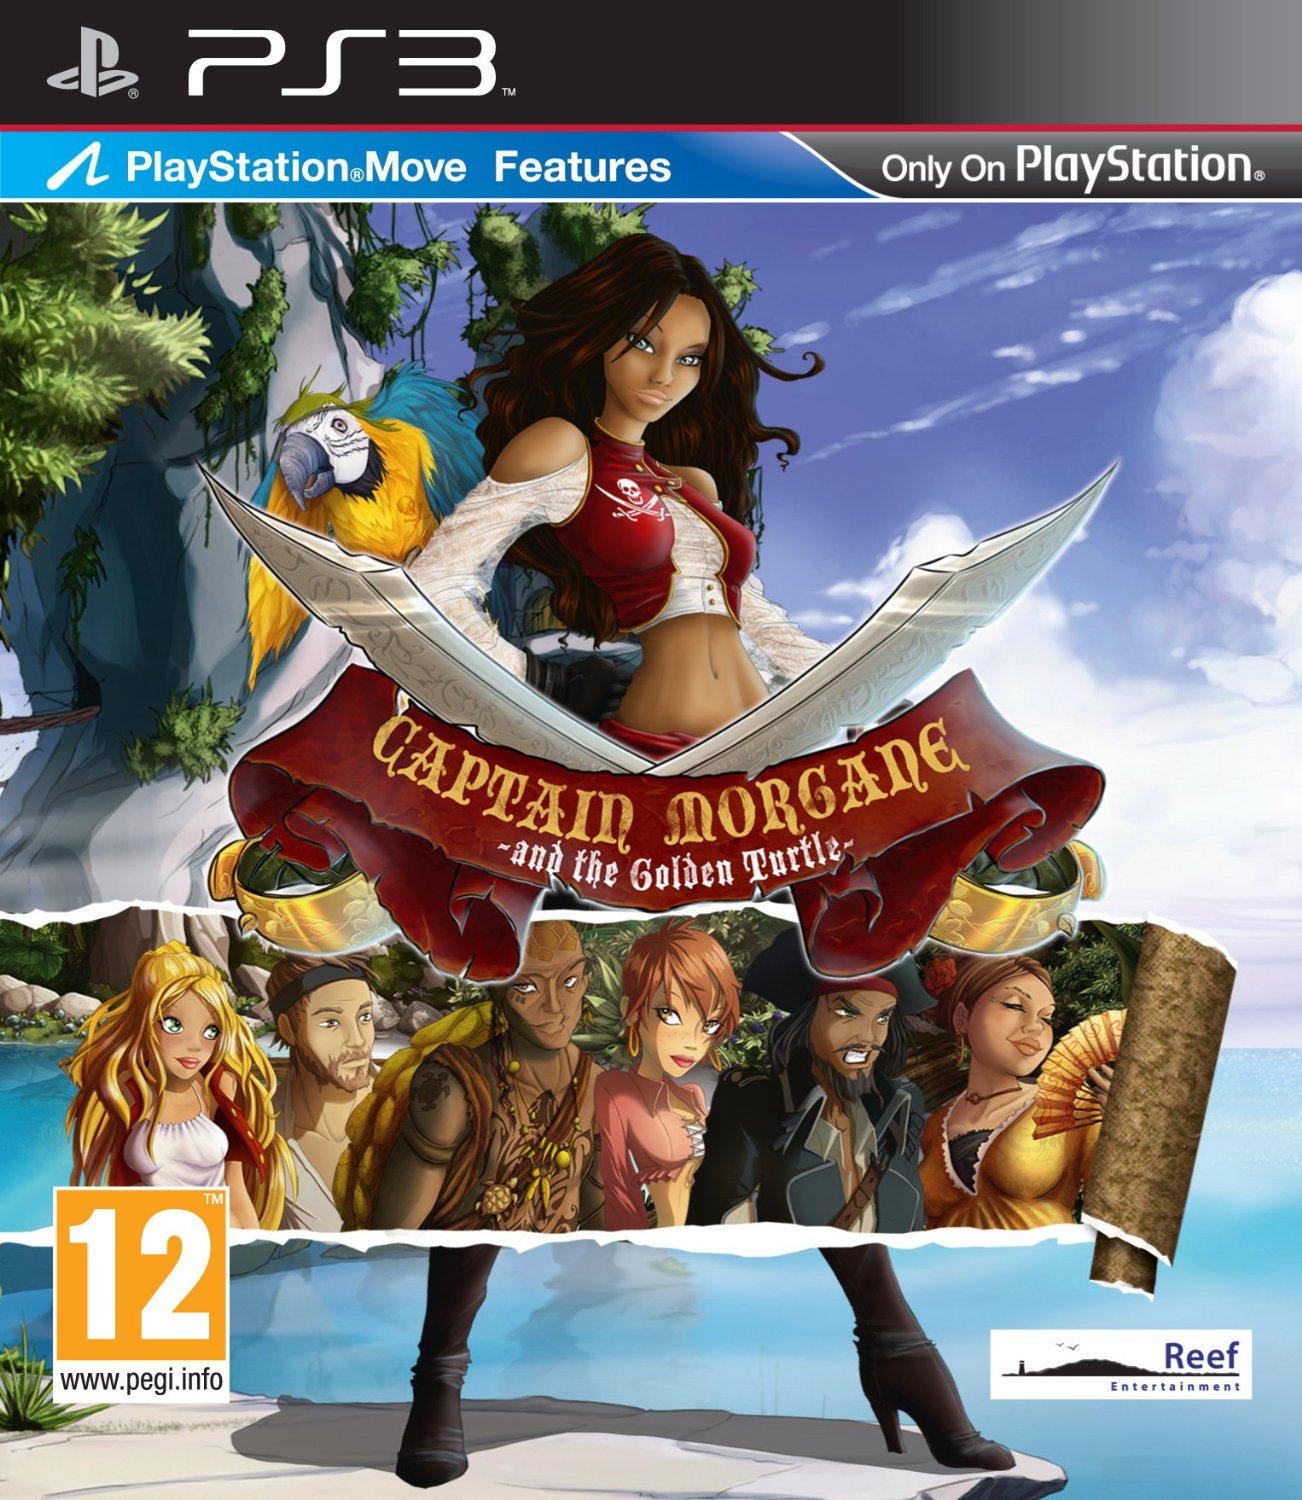 Captain Morgane And The Golden Turtle Backgrounds, Compatible - PC, Mobile, Gadgets| 1302x1500 px